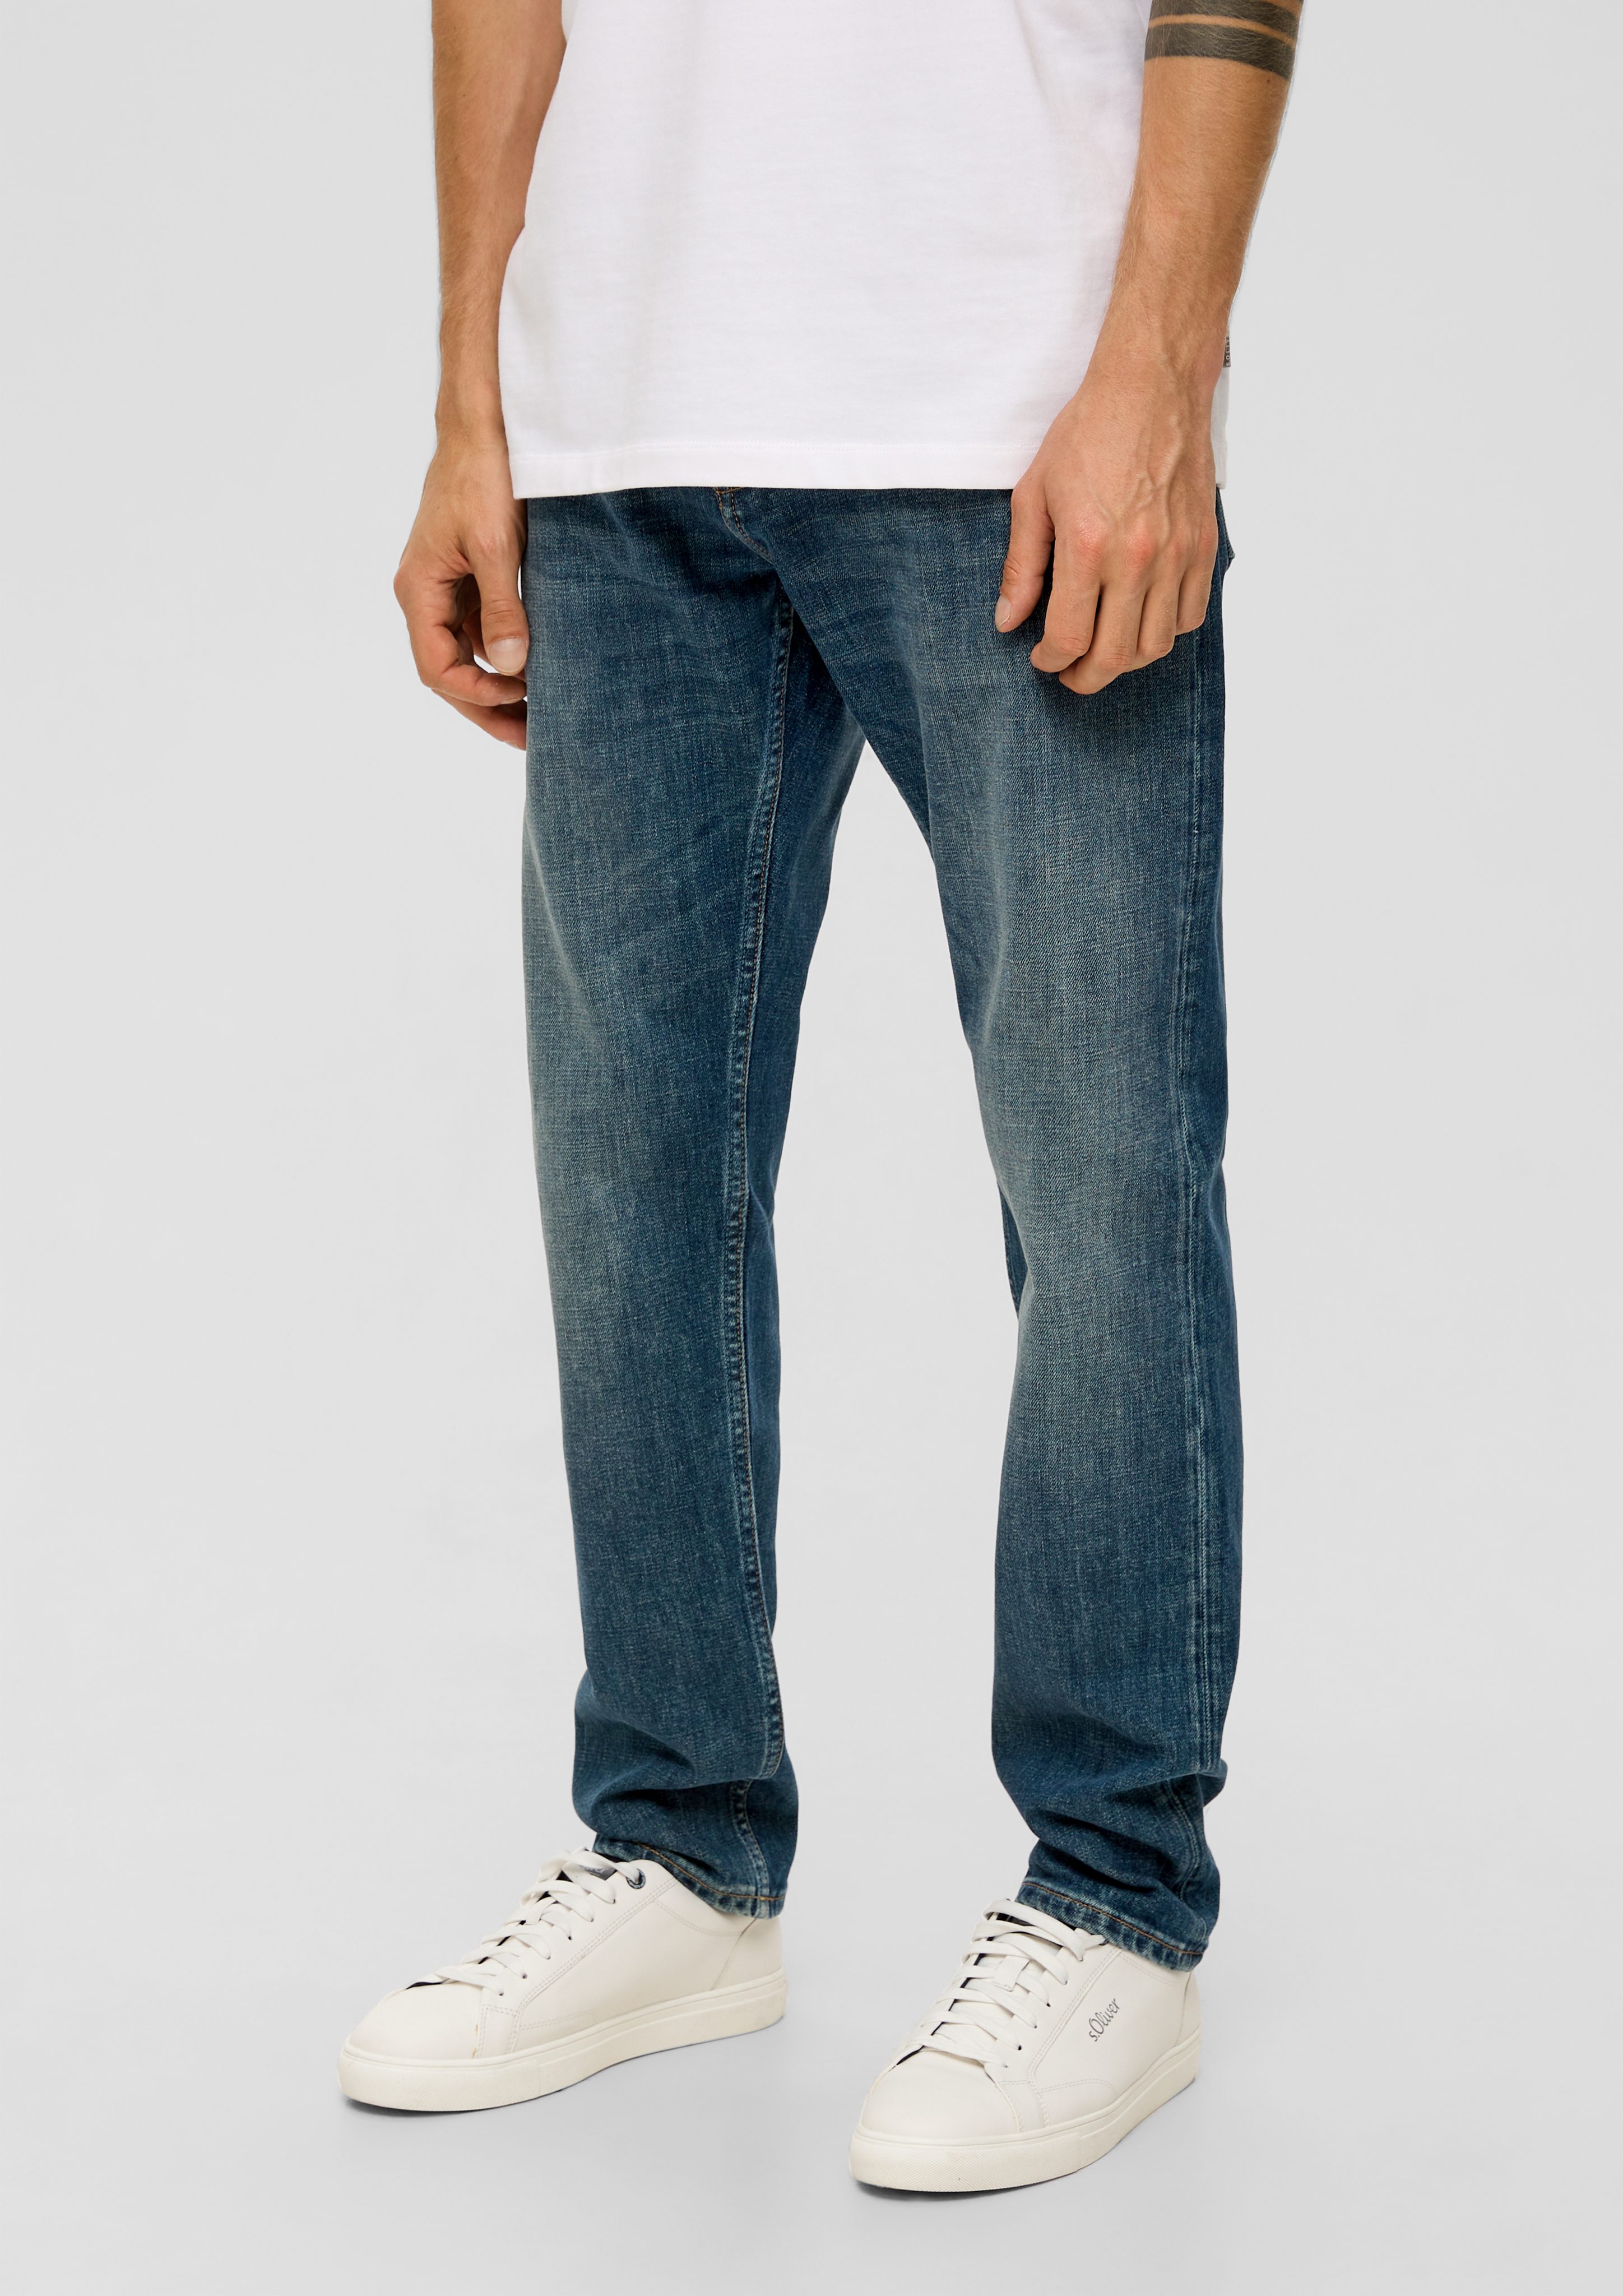 / / Ziernaht Rise Leder-Patch, High / Fit Regular Jeans Leg Mauro Stoffhose Tapered s.Oliver